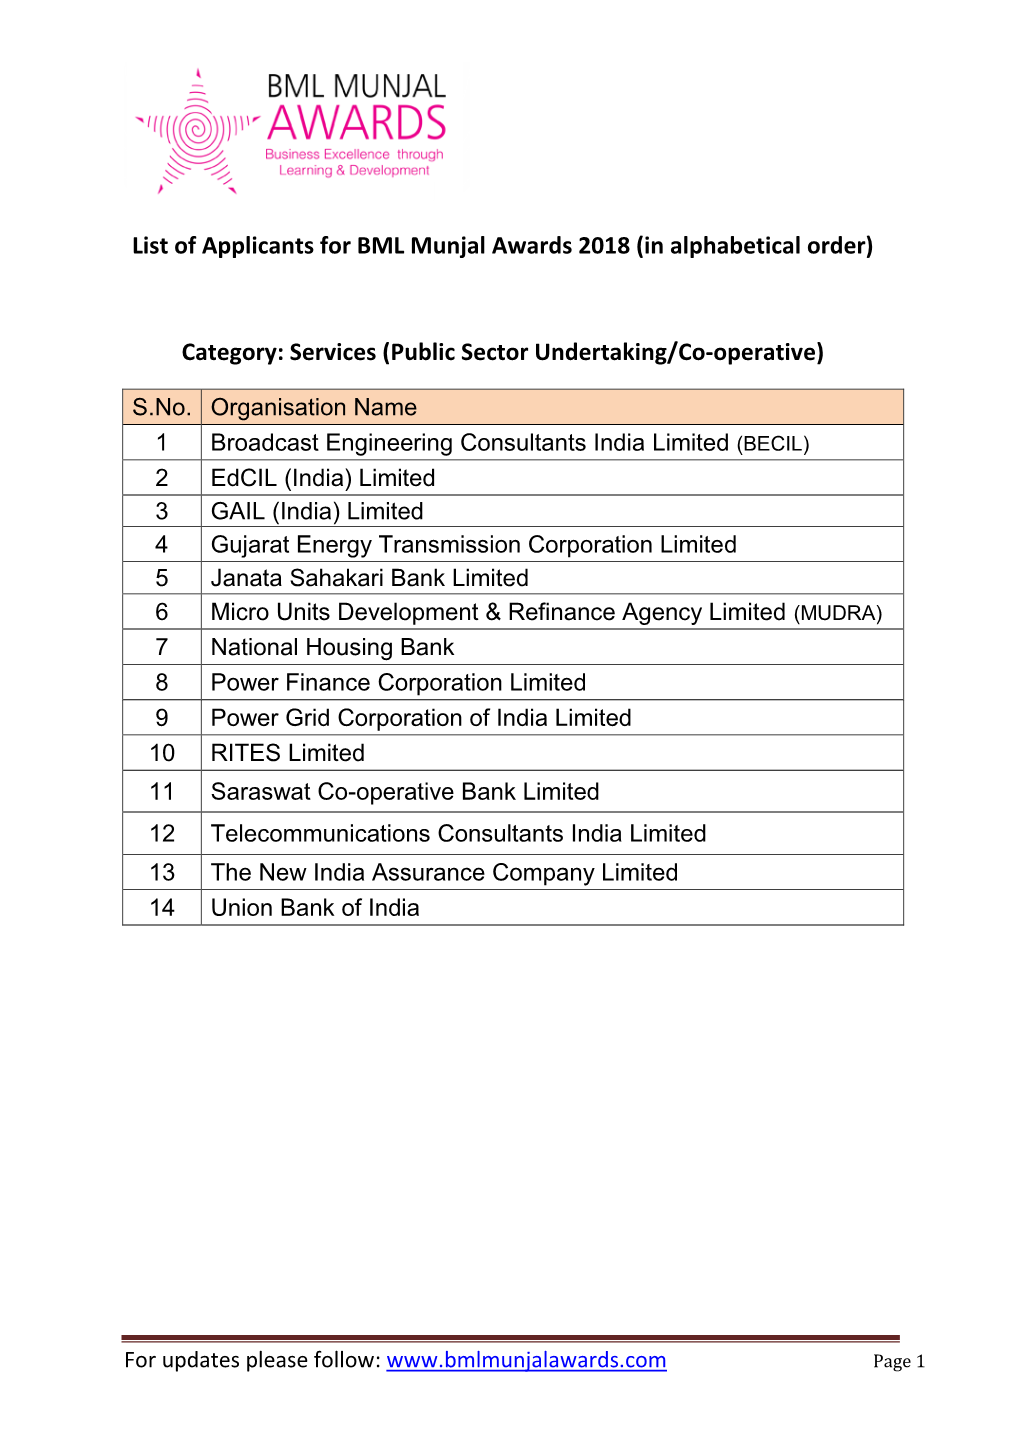 List of Applicants for BML Munjal Awards 2018 (In Alphabetical Order) Category: Services (Public Sector Undertaking/Co-Operative